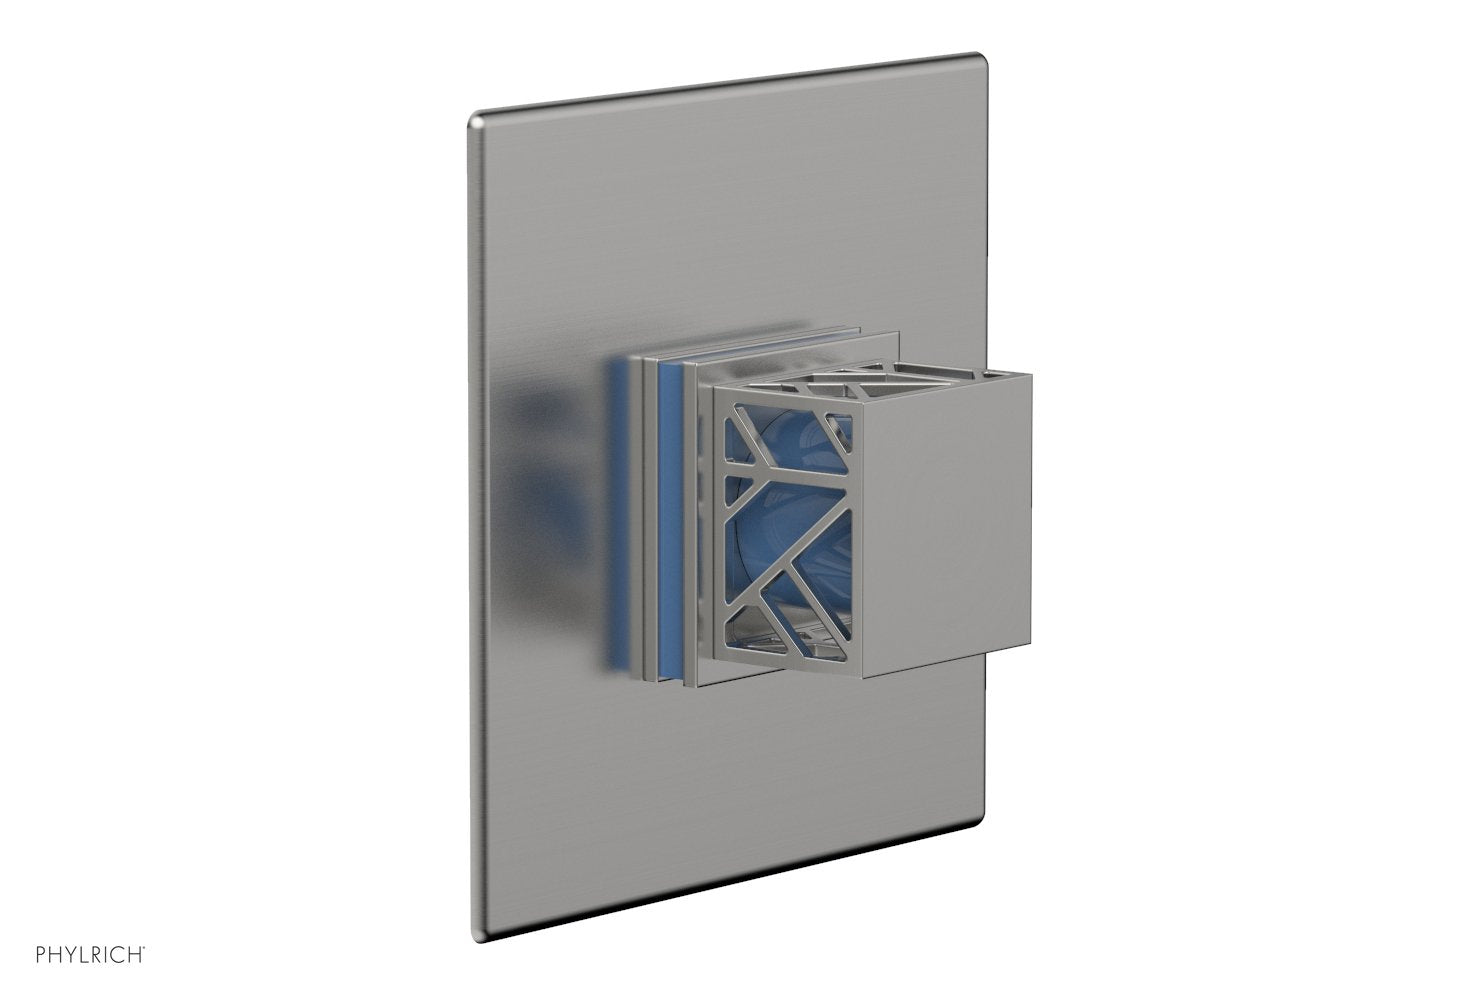 Phylrich JOLIE Pressure Balance Shower Plate & Handle Trim, Square Handle with "Light Blue" Accents